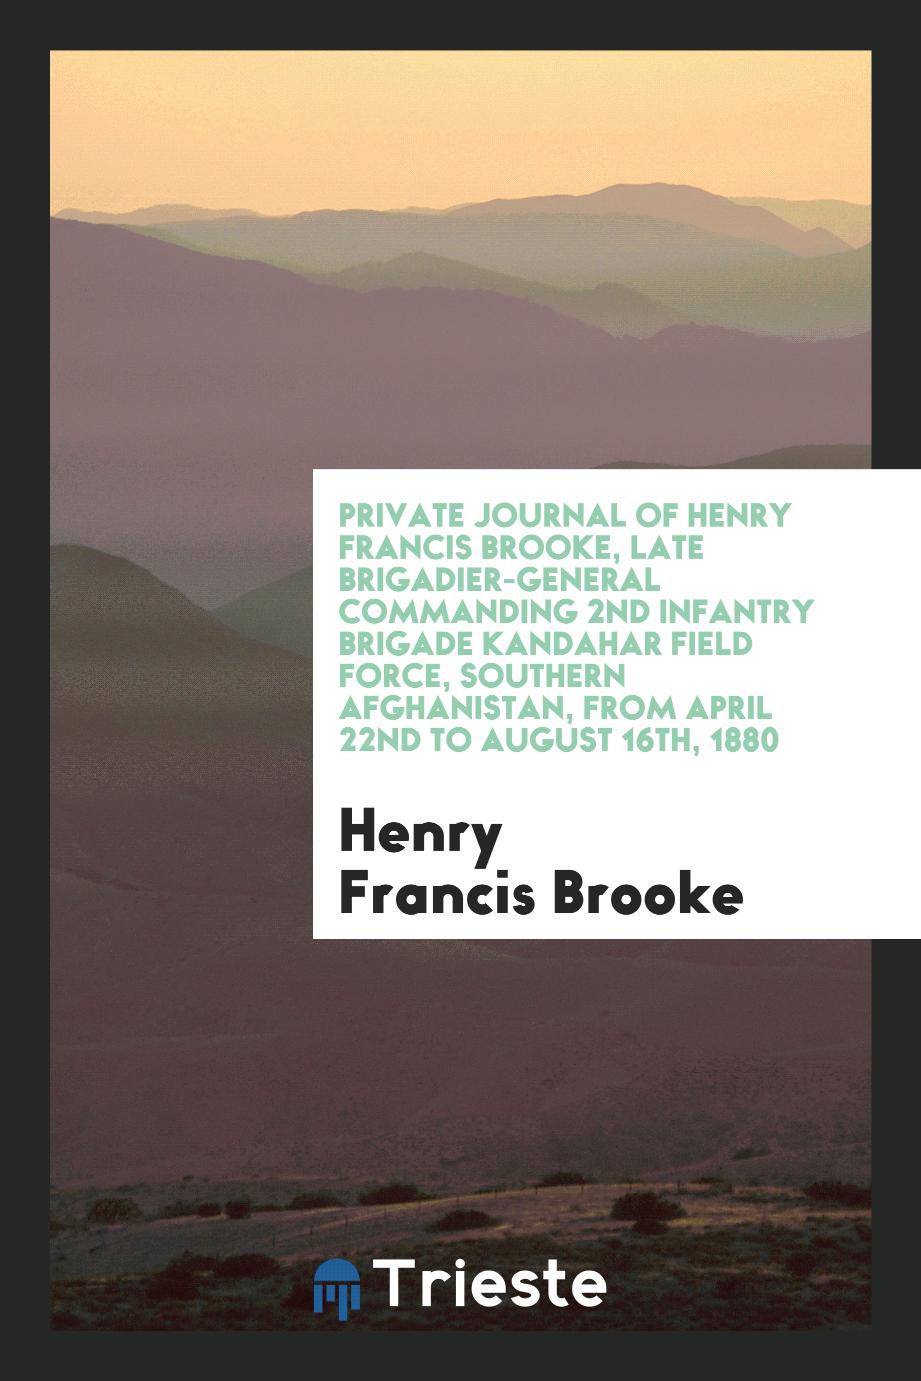 Private Journal of Henry Francis Brooke, Late Brigadier-General Commanding 2nd Infantry Brigade Kandahar Field Force, Southern Afghanistan, from April 22nd to August 16th, 1880